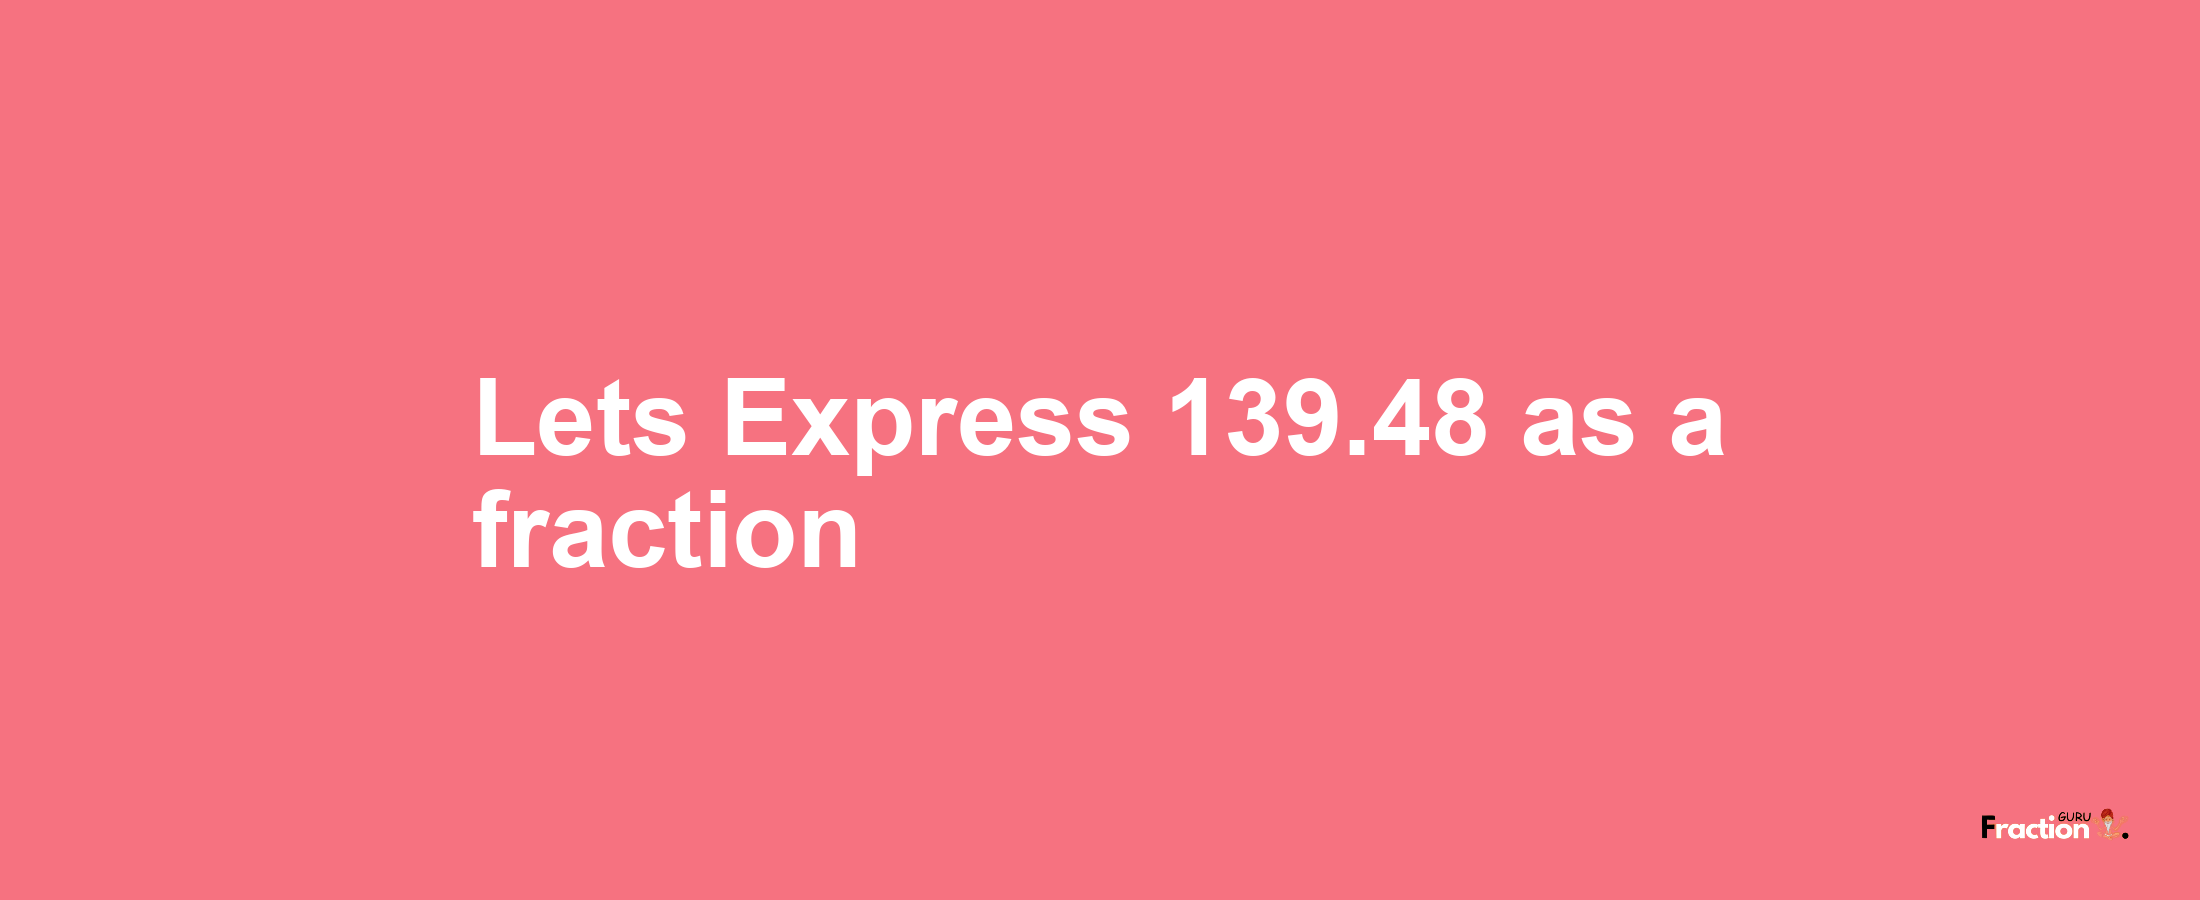 Lets Express 139.48 as afraction